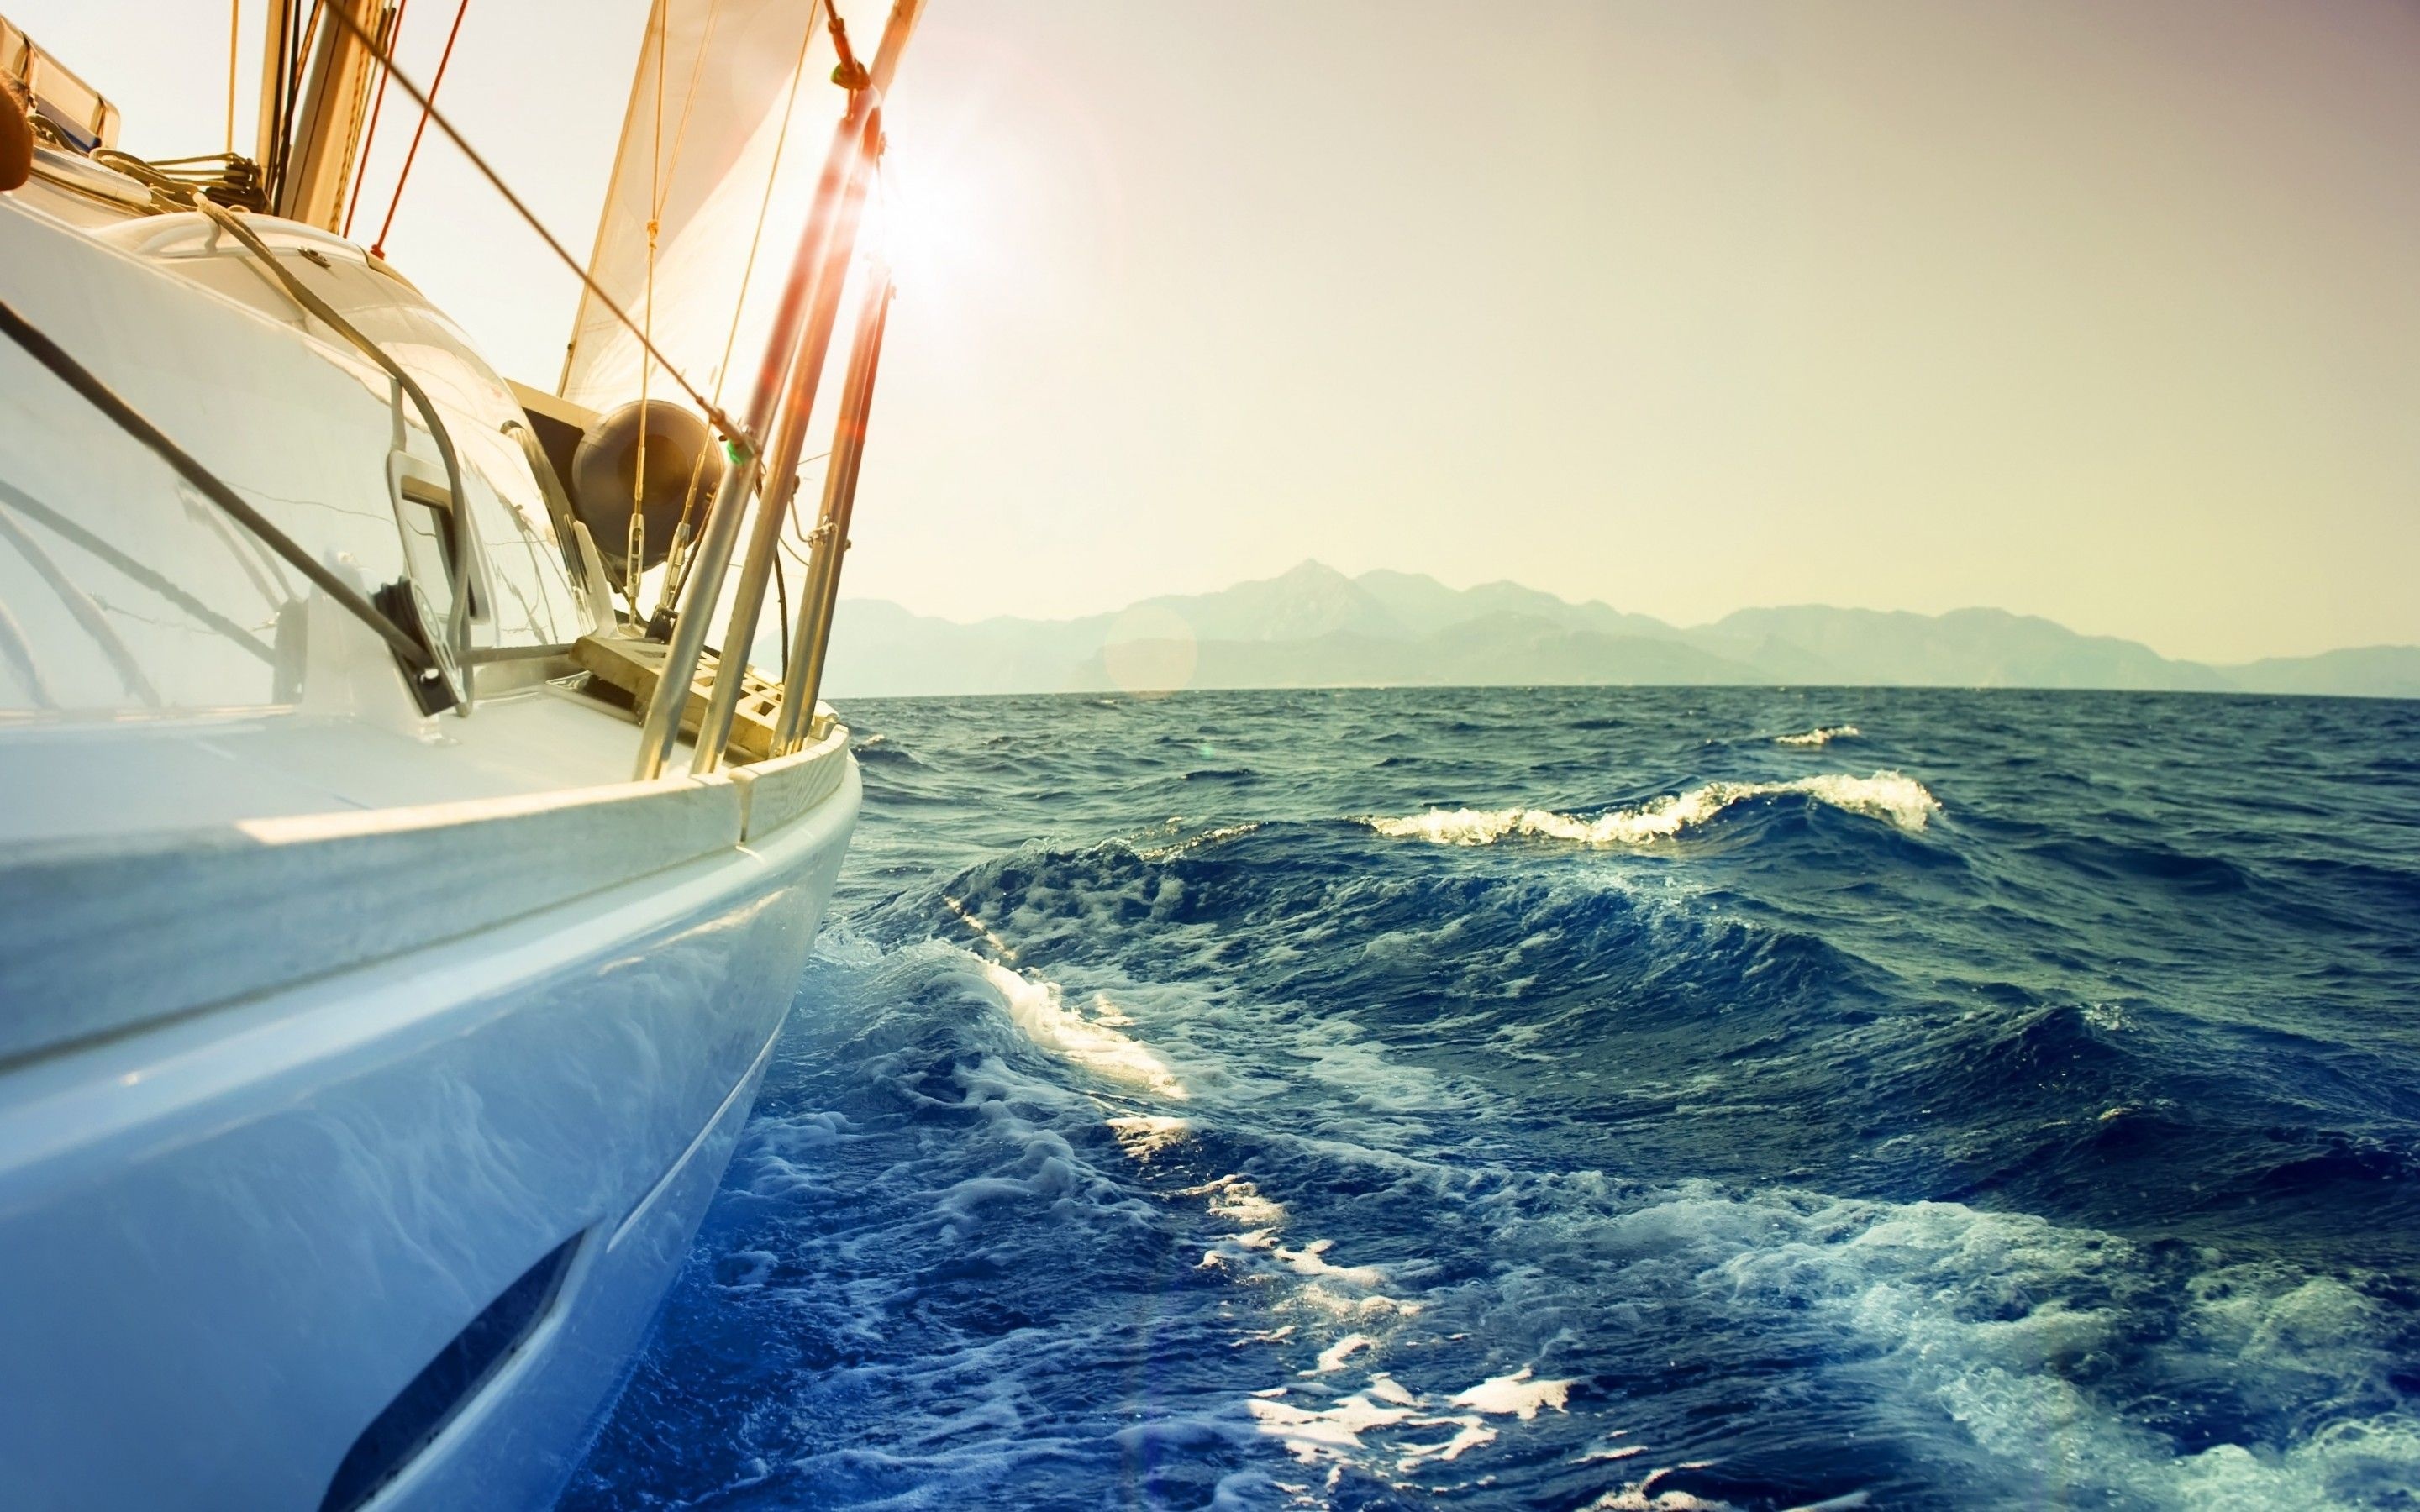 Sail Boat: Yacht, A sailing or power vessel used for pleasure, cruising, or racing. 2880x1800 HD Background.